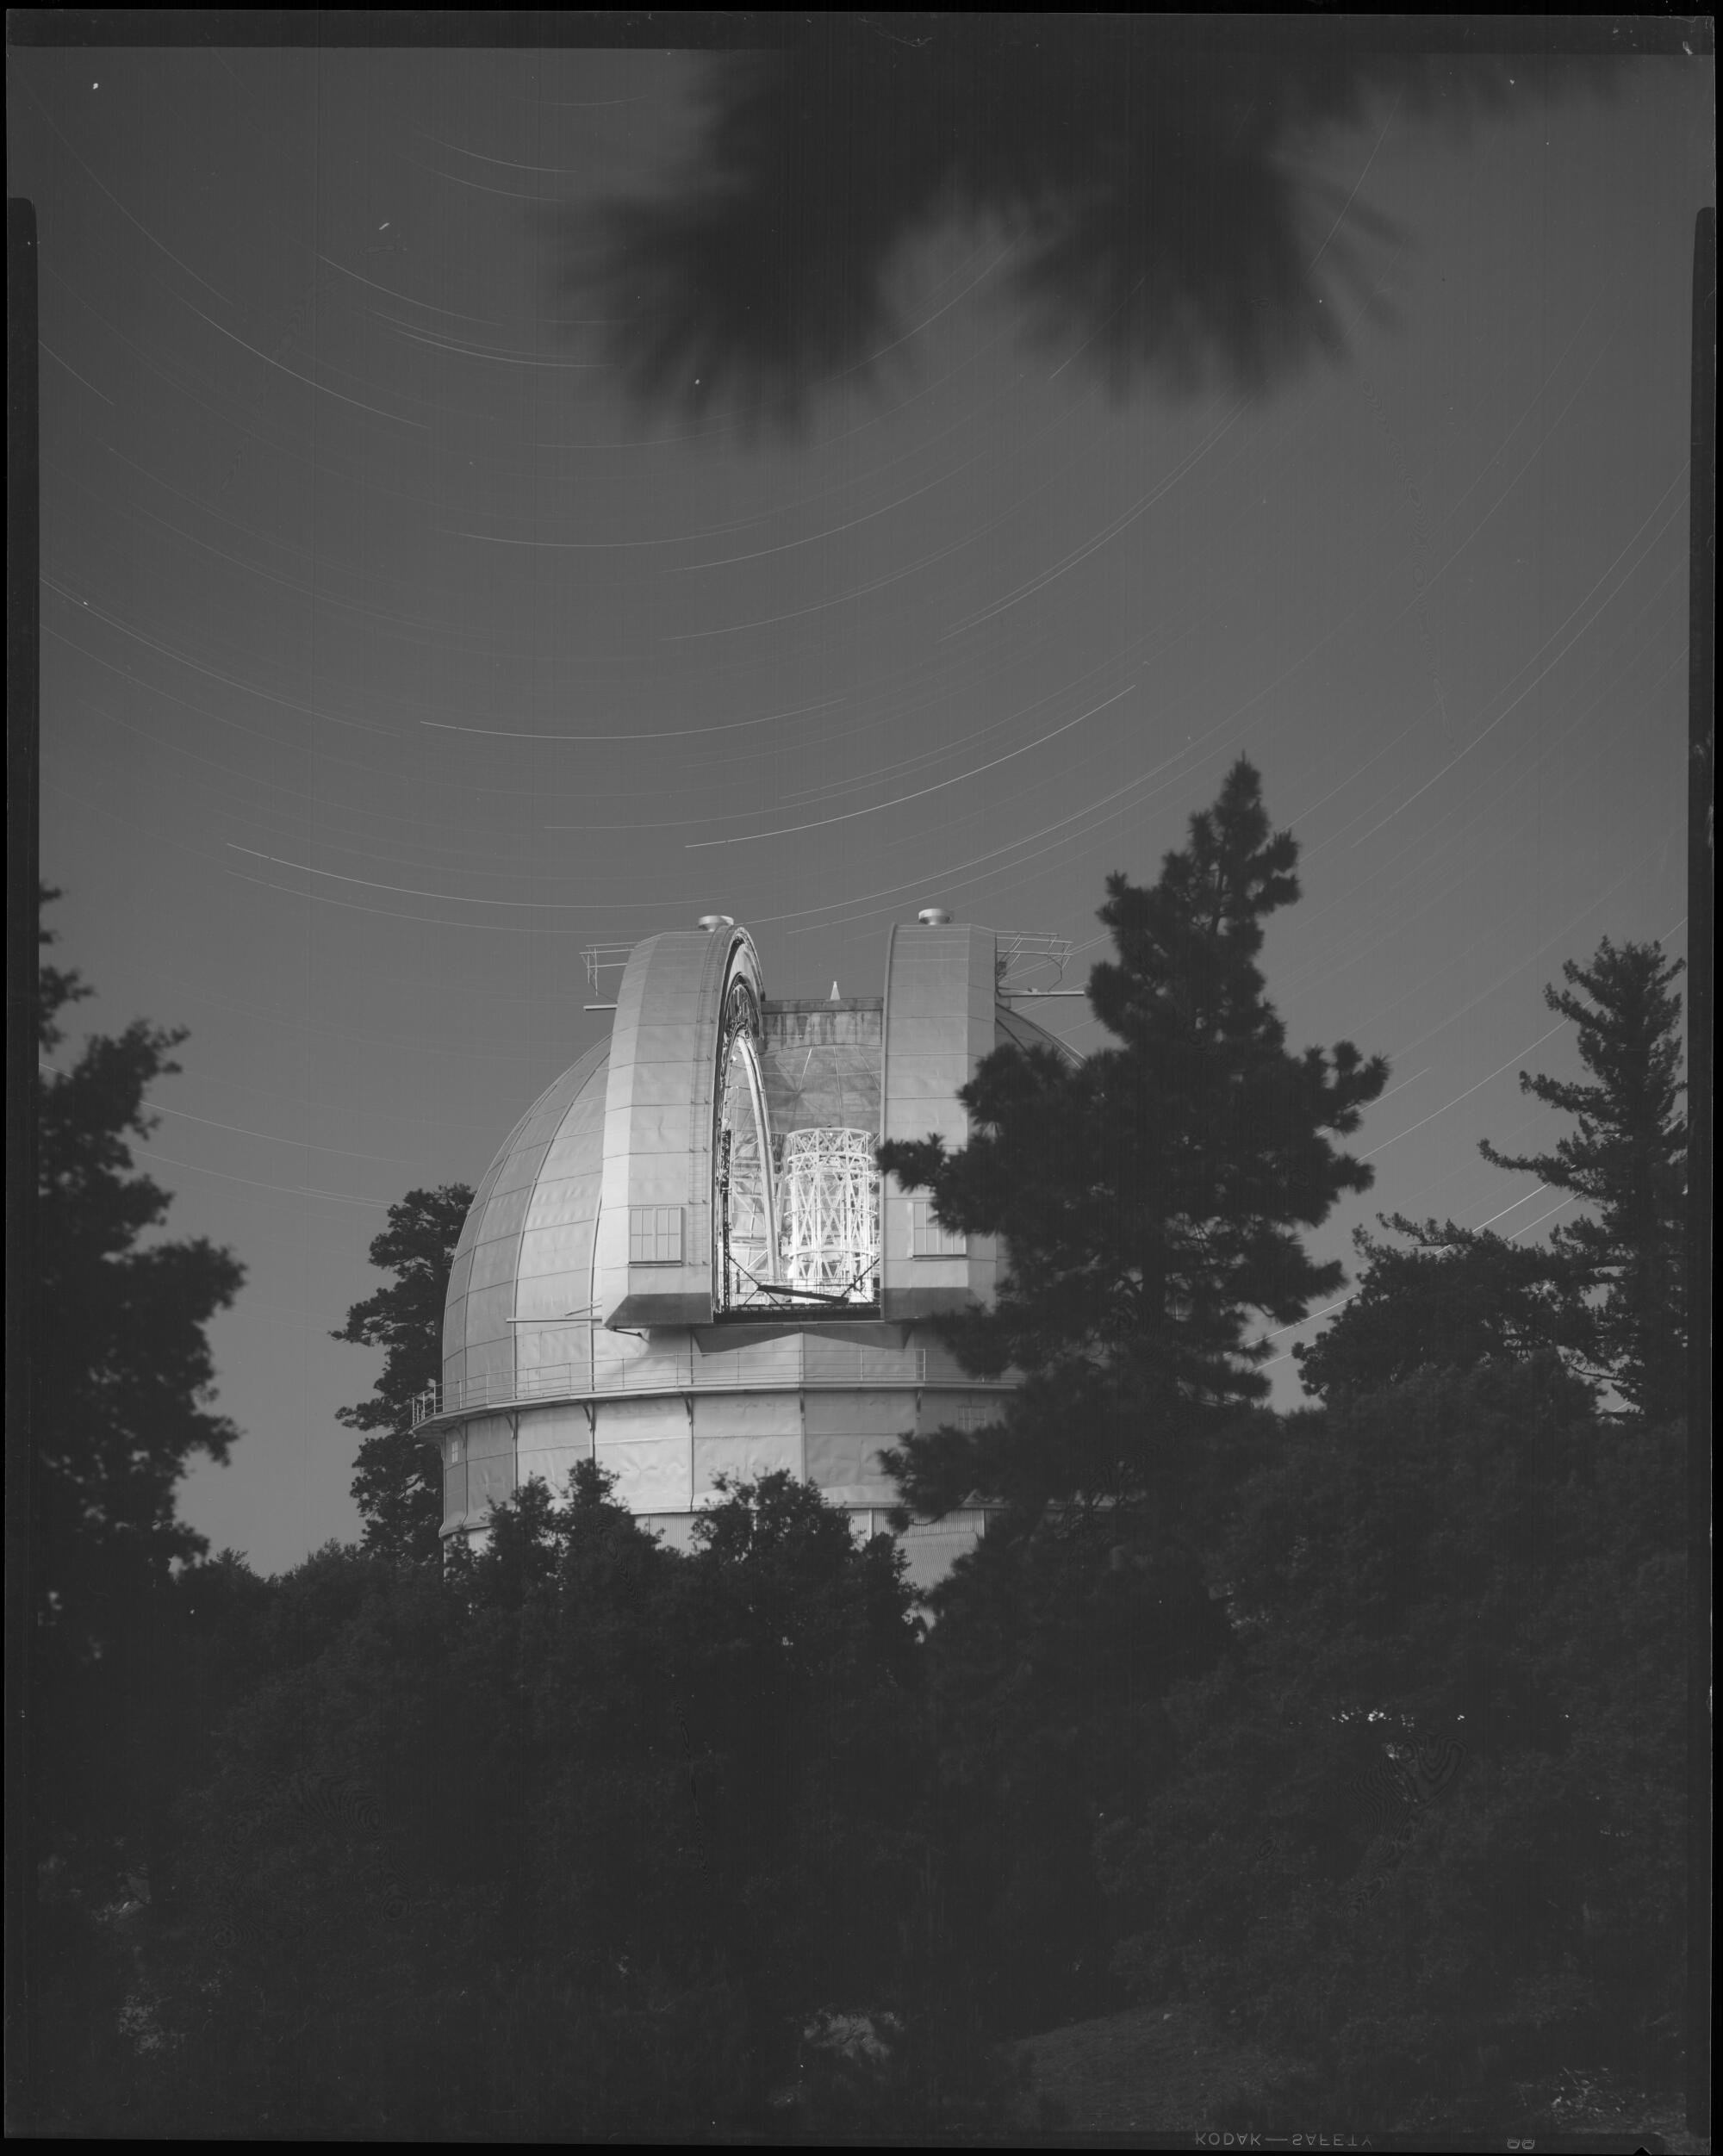 Mt. Wilson Observatory's 100-inch telescope dome by moonlight circa 1950,. Star trails are visible in the sky.